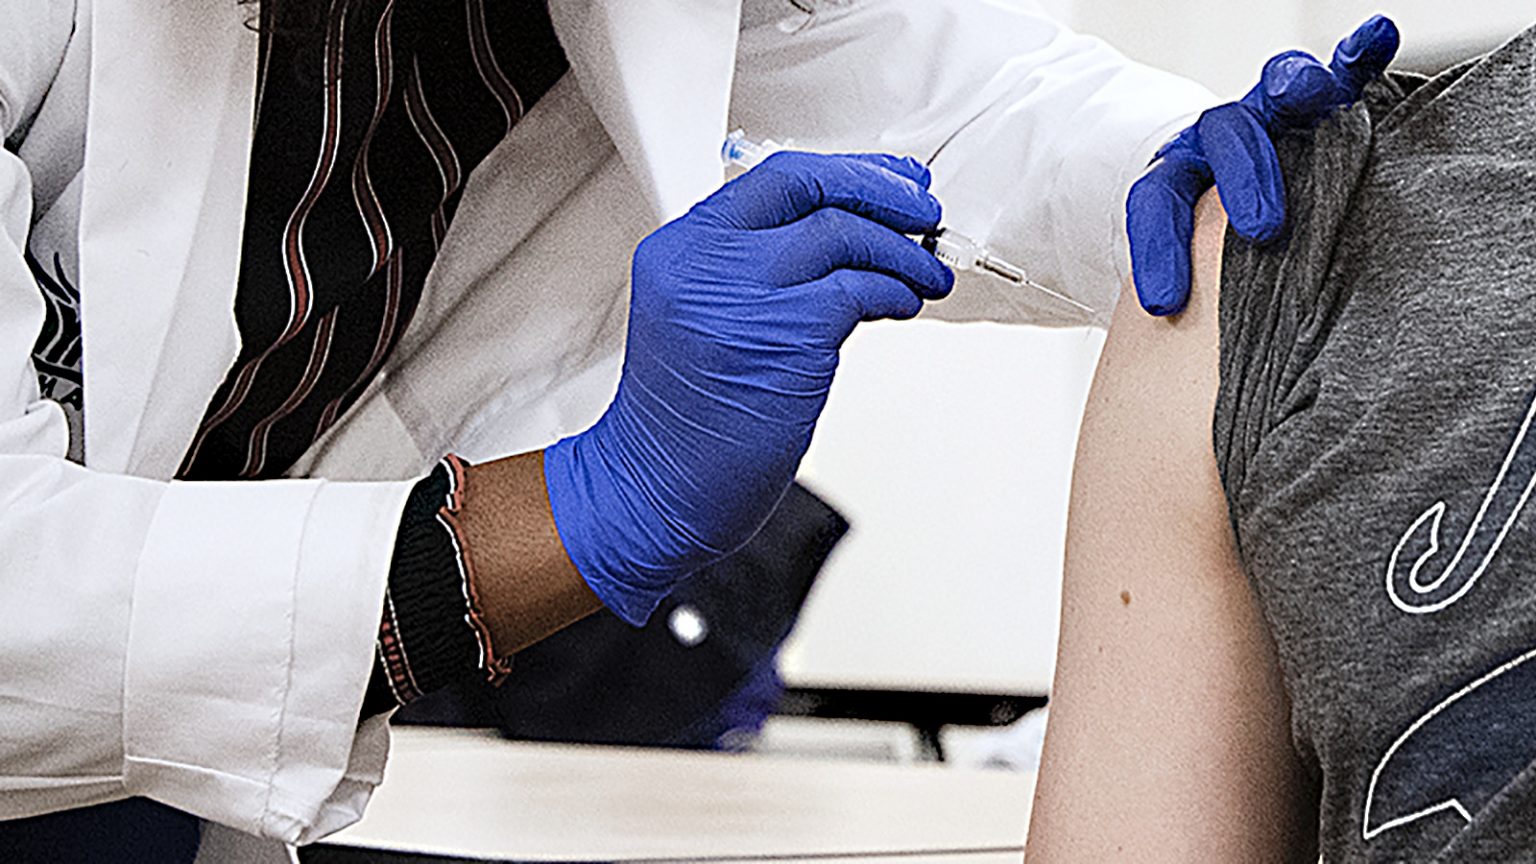 Gloved hands holding syringe inject a COVID-19 vaccine into an upper arm.